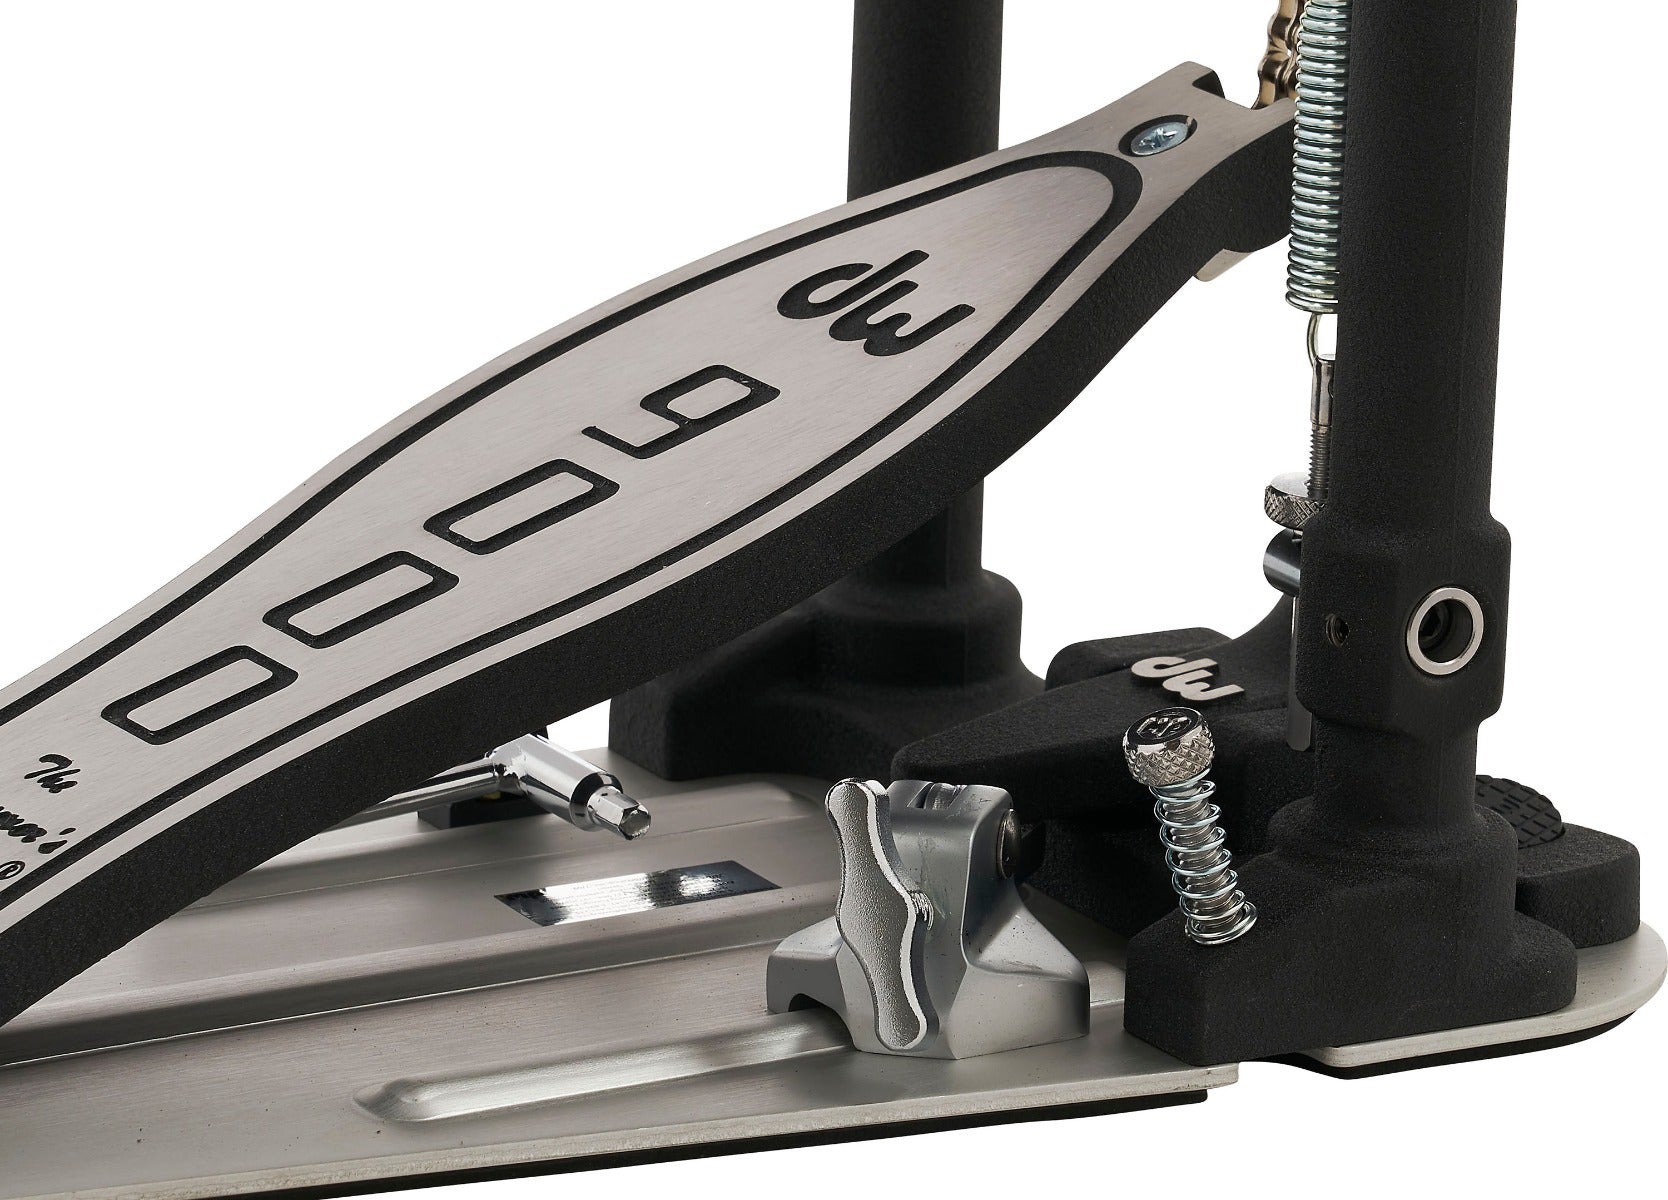 Drum Workshop DWCP9000XF Single Bass Drum Pedal - Extended Footboard